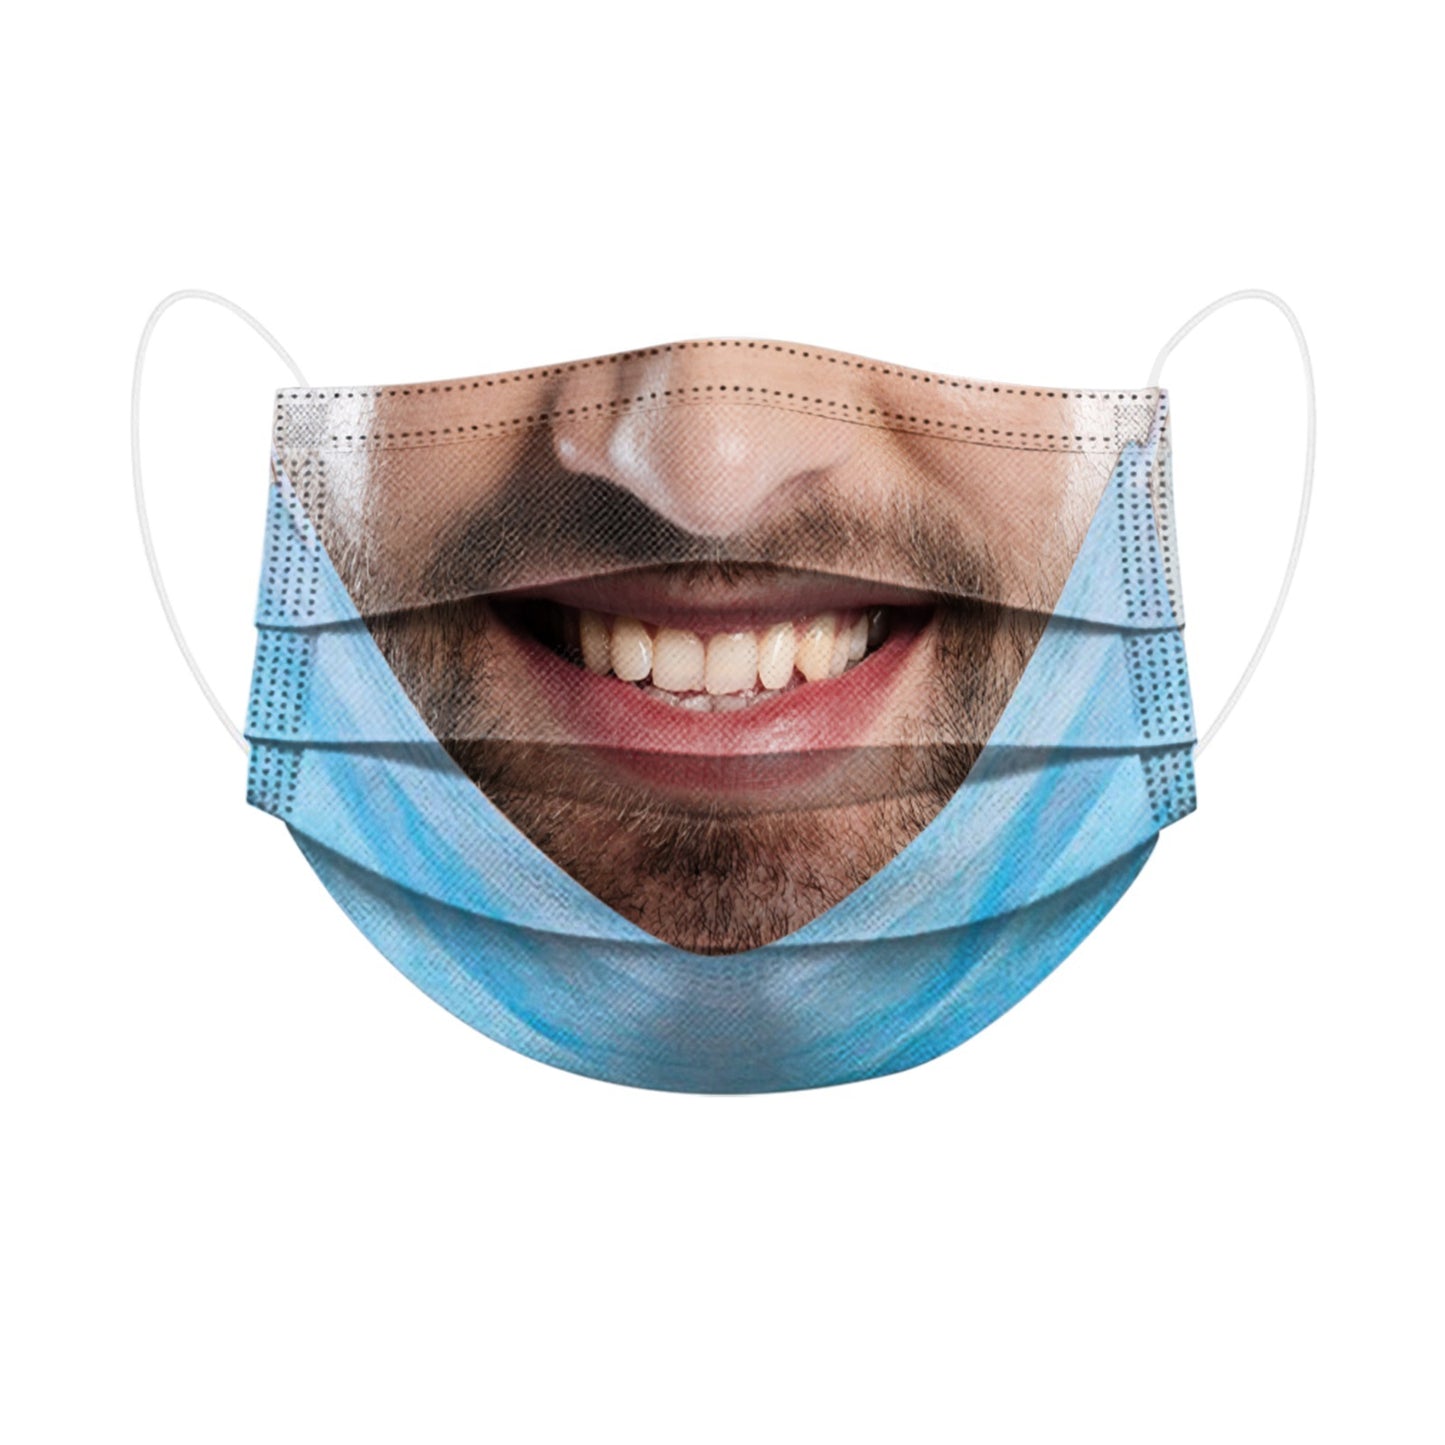 Funny Face Mask Disposable Printing Funny Protective Mask